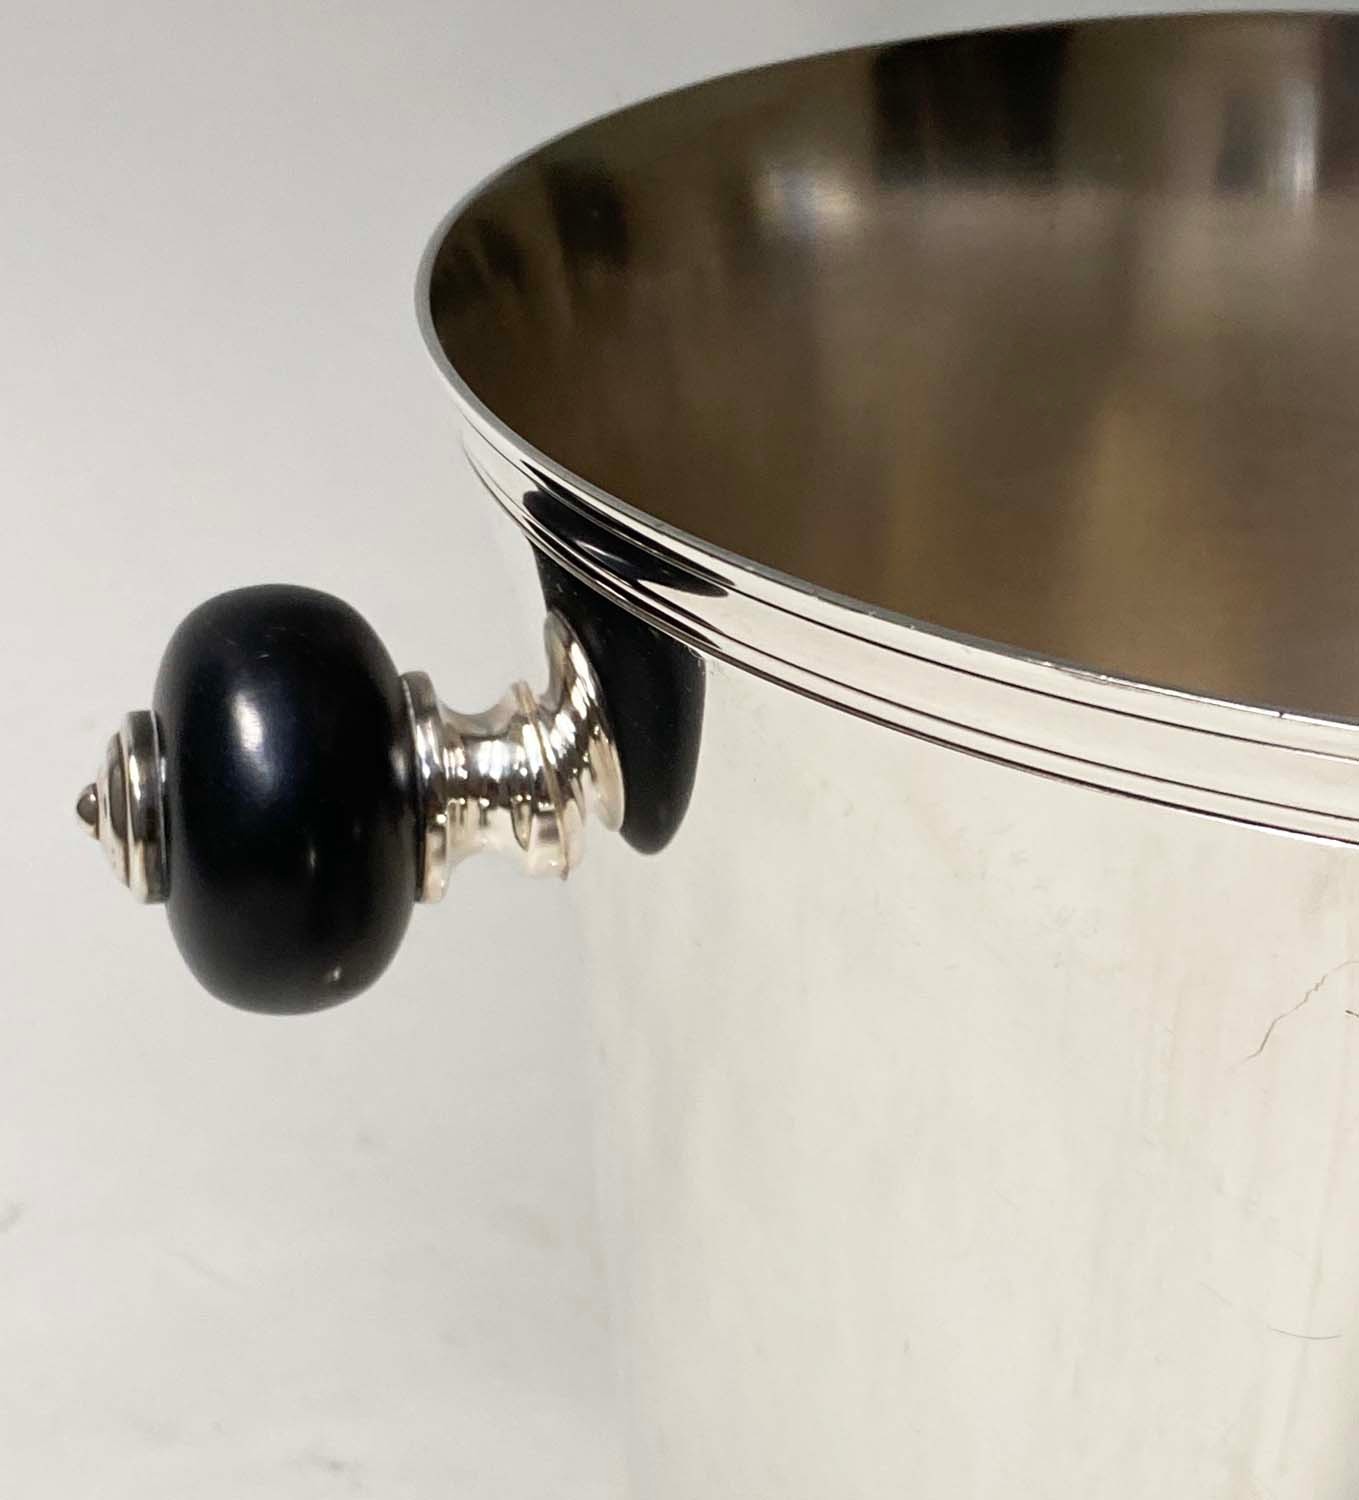 CHRISTOFLE CHAMPAGNE BUCKET, silver plated urn form with turned ebony handles and moulded - Image 6 of 6